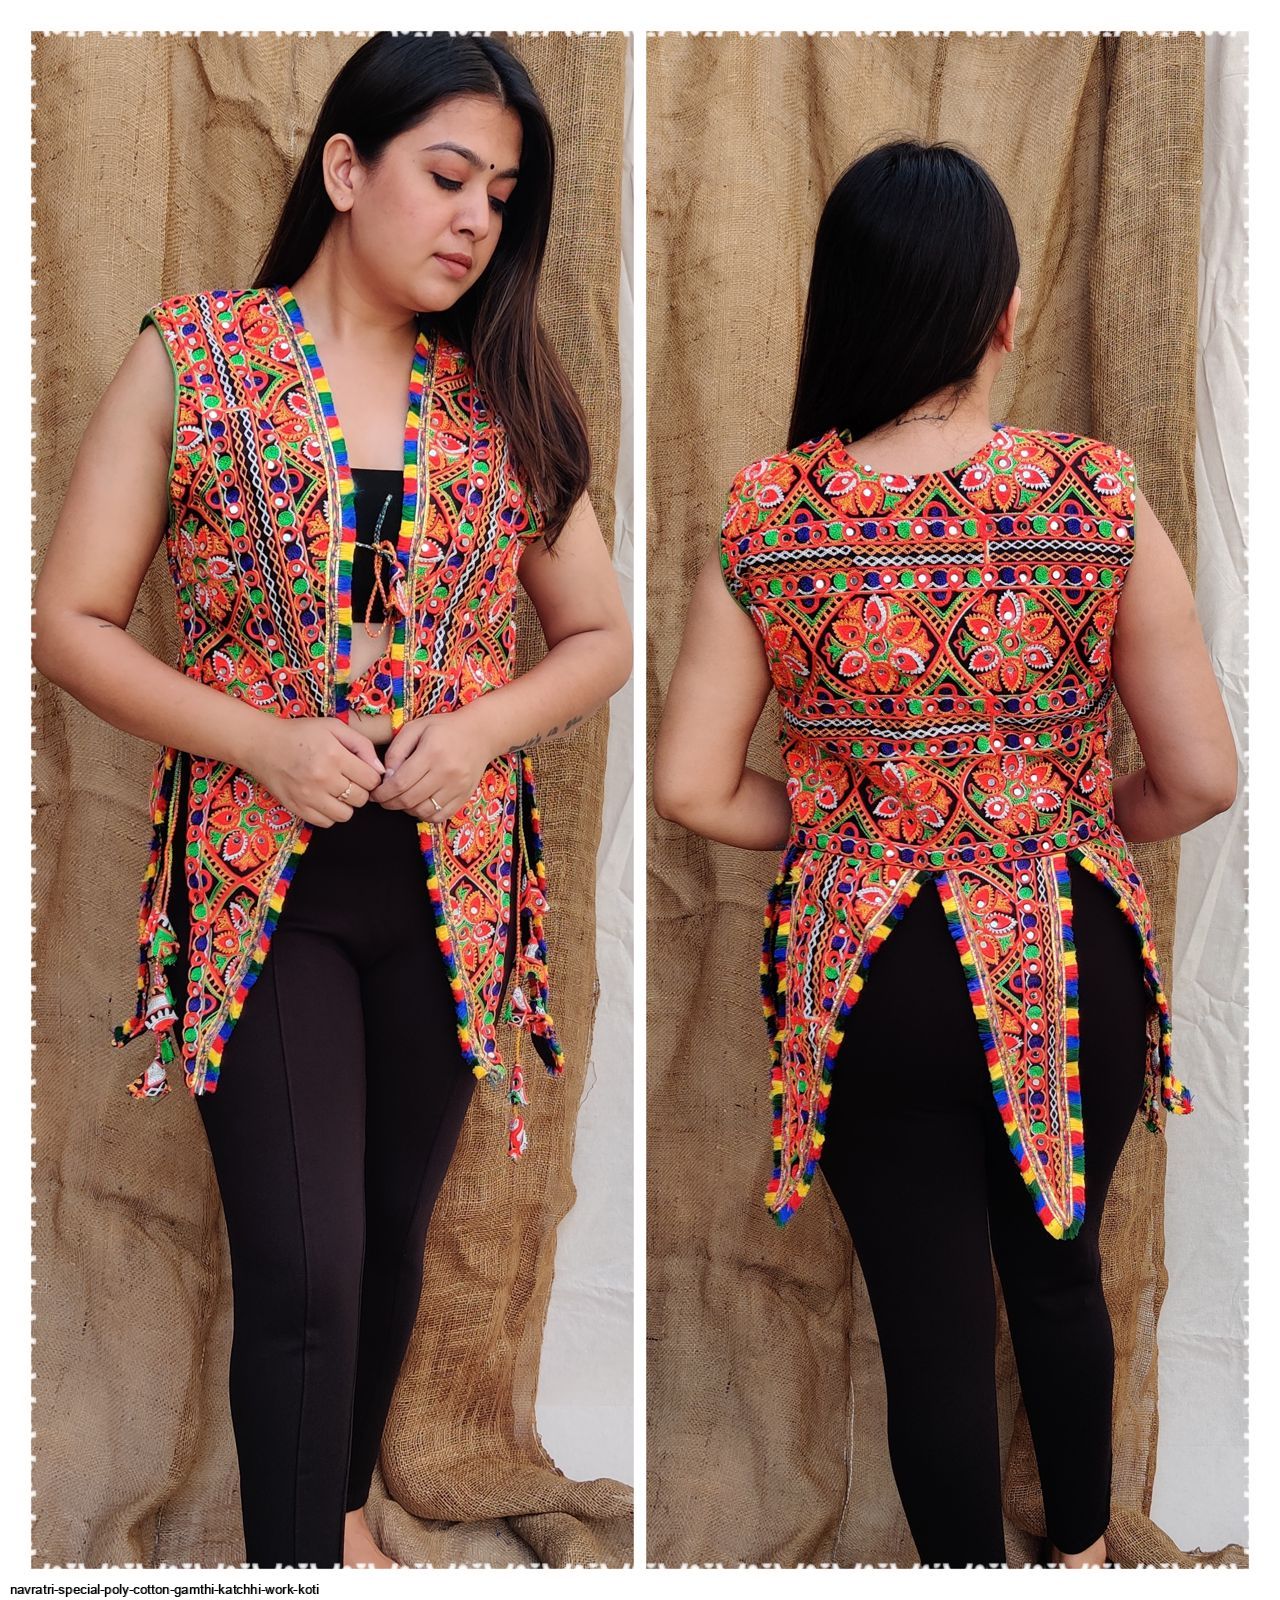 Buy Personi Ethnic Tradiotional Jacket for Women Navratri Special Kutchi  Koti Embroidered Mirrior Work Waist Coat|19 Inches 19 Inches Width at  Amazon.in